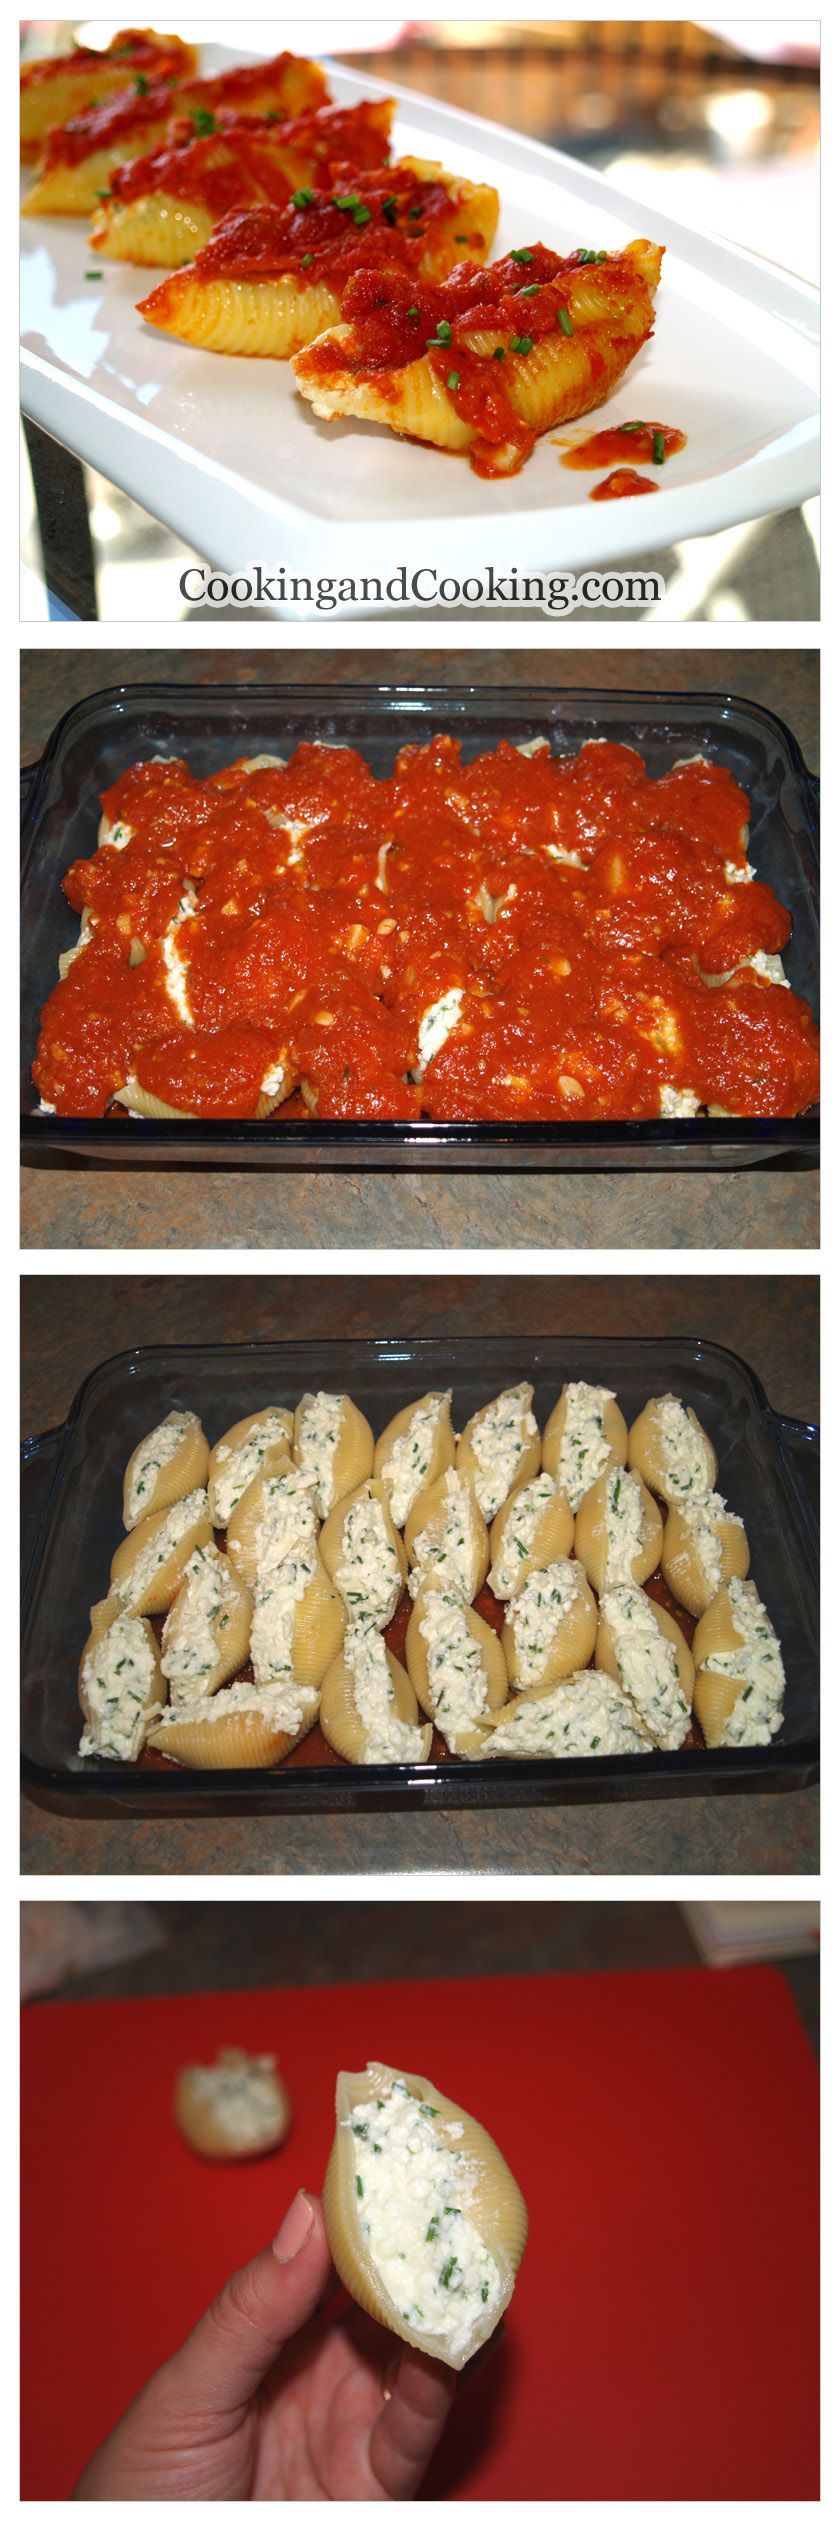 Ricotta Stuffed Shells Recipe – Im going the easy way out and using pre-made sauce! But I found m